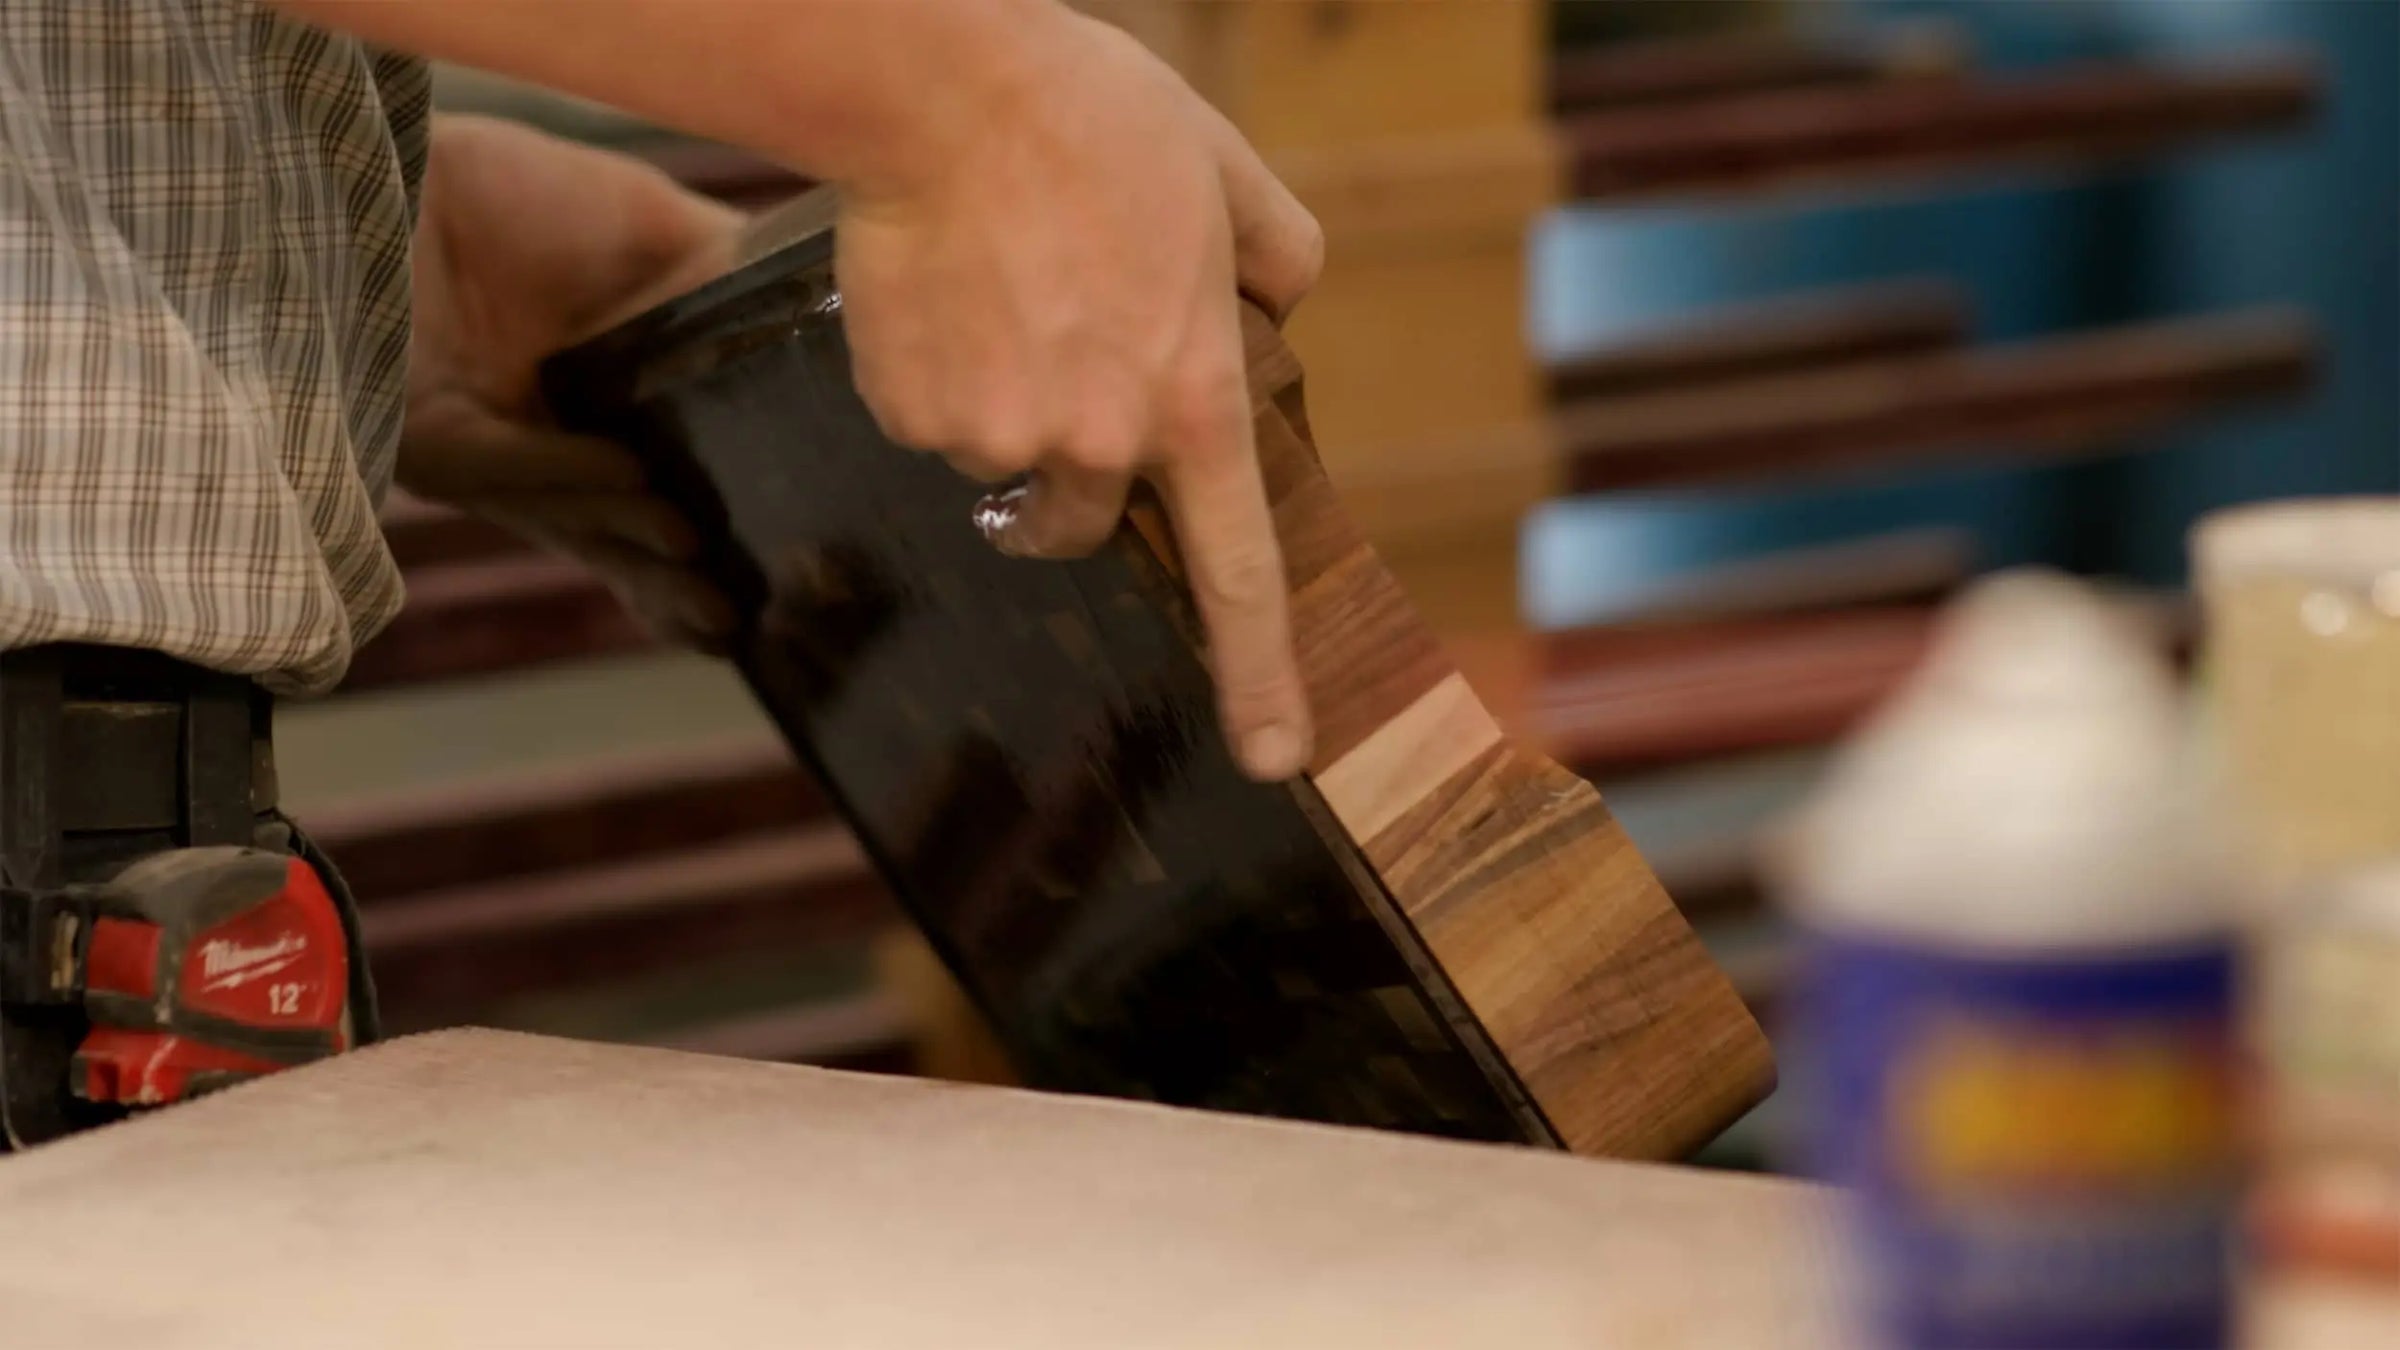 Close-up of a person holding a finished wooden end grain chopping block, demonstrating the smooth, polished surface and quality craftsmanship